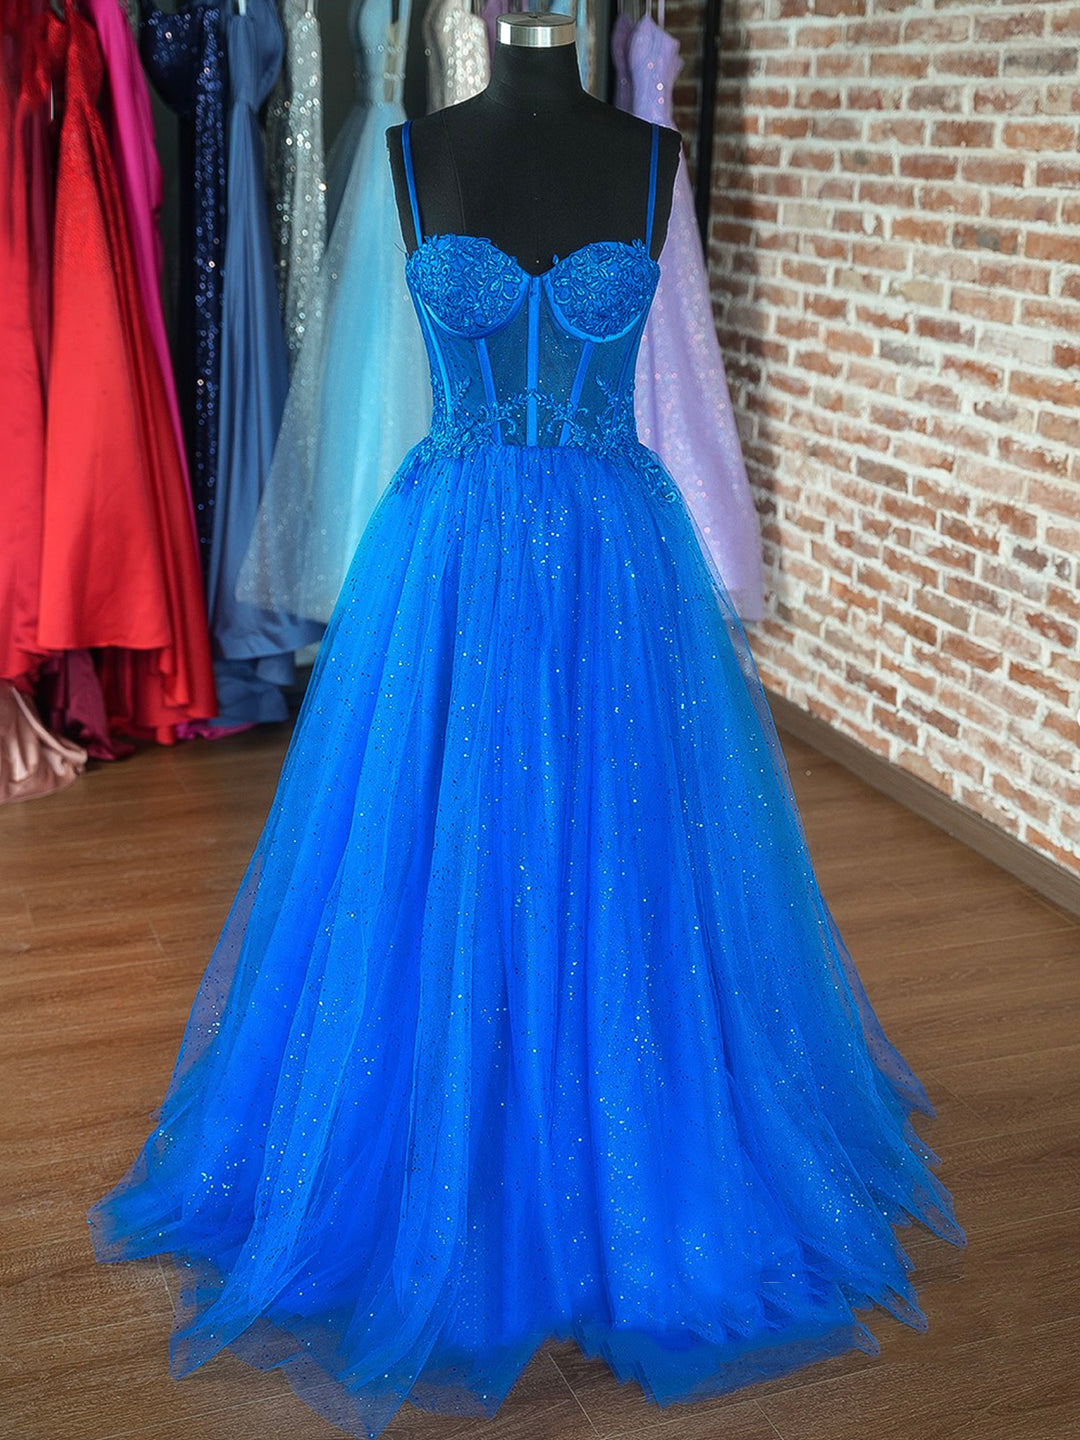 Party Dress Dresses, Blue Spaghetti Strap Tulle Formal Dress, Blue Evening Dress with Lace